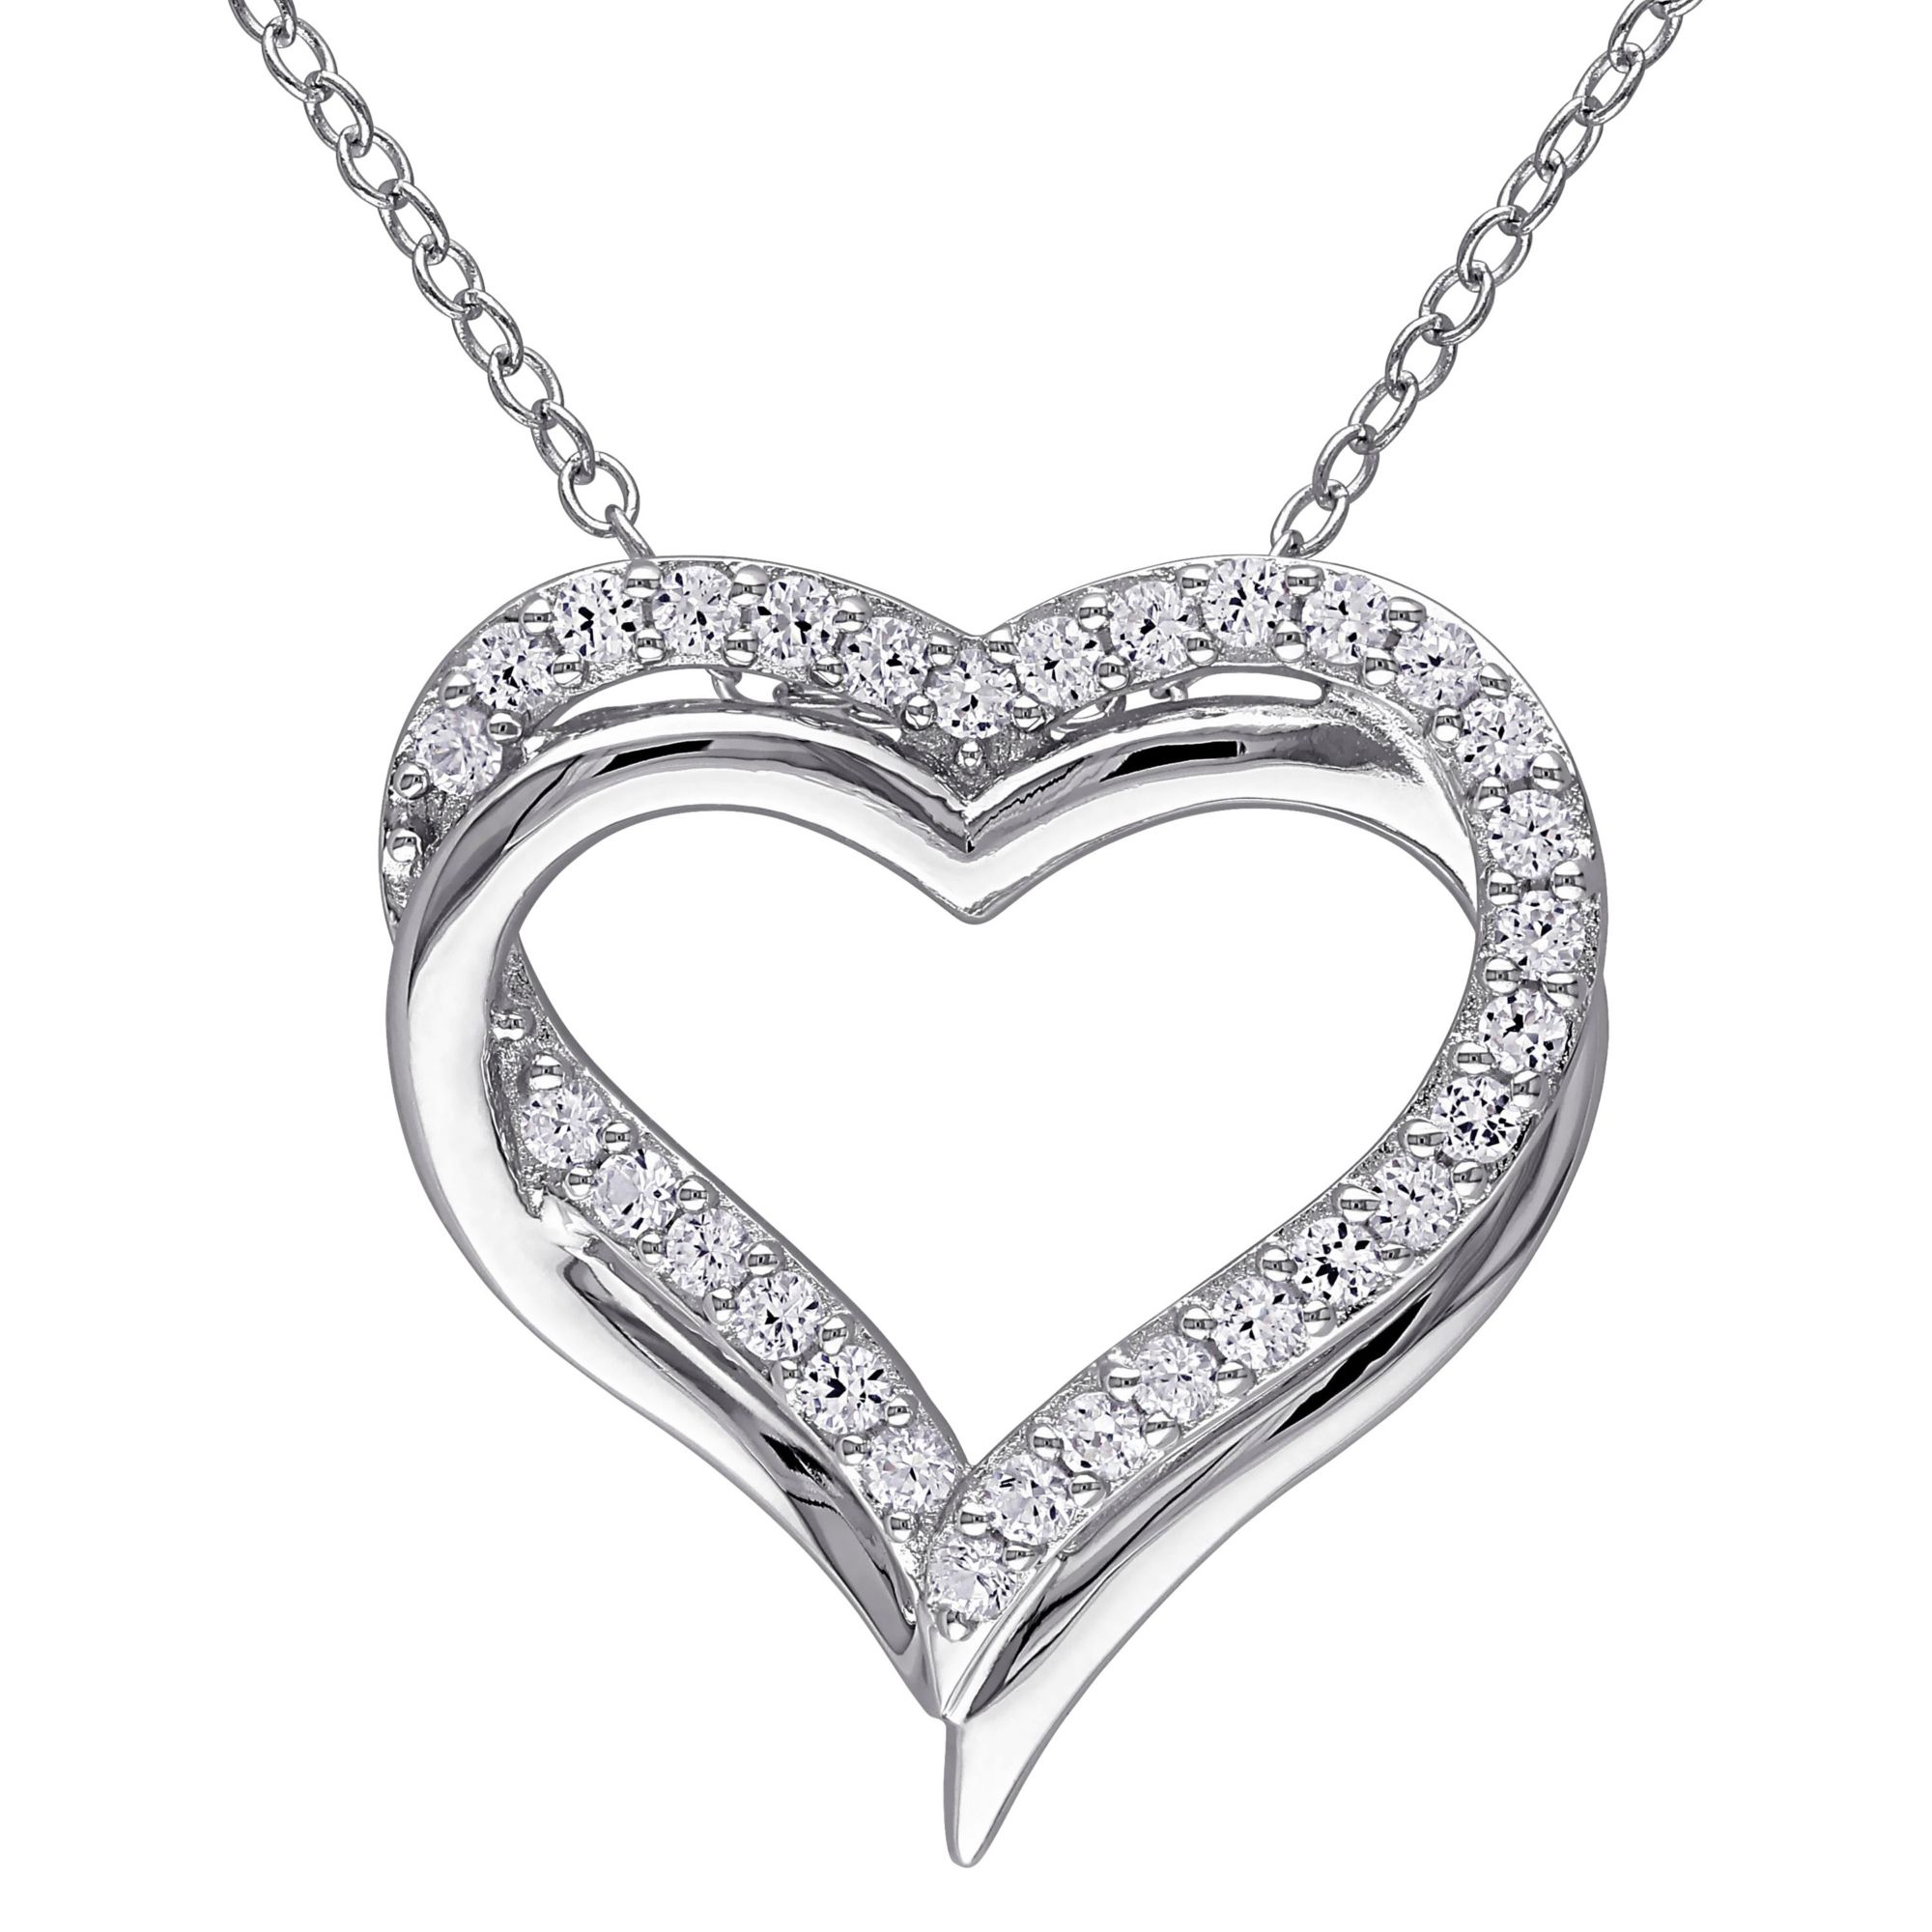 Luxury Love Heart Magnet Necklaces High Quality Smooth Plain Silver Color  Magnetic Heart Pendant Necklace Jewelry for Women